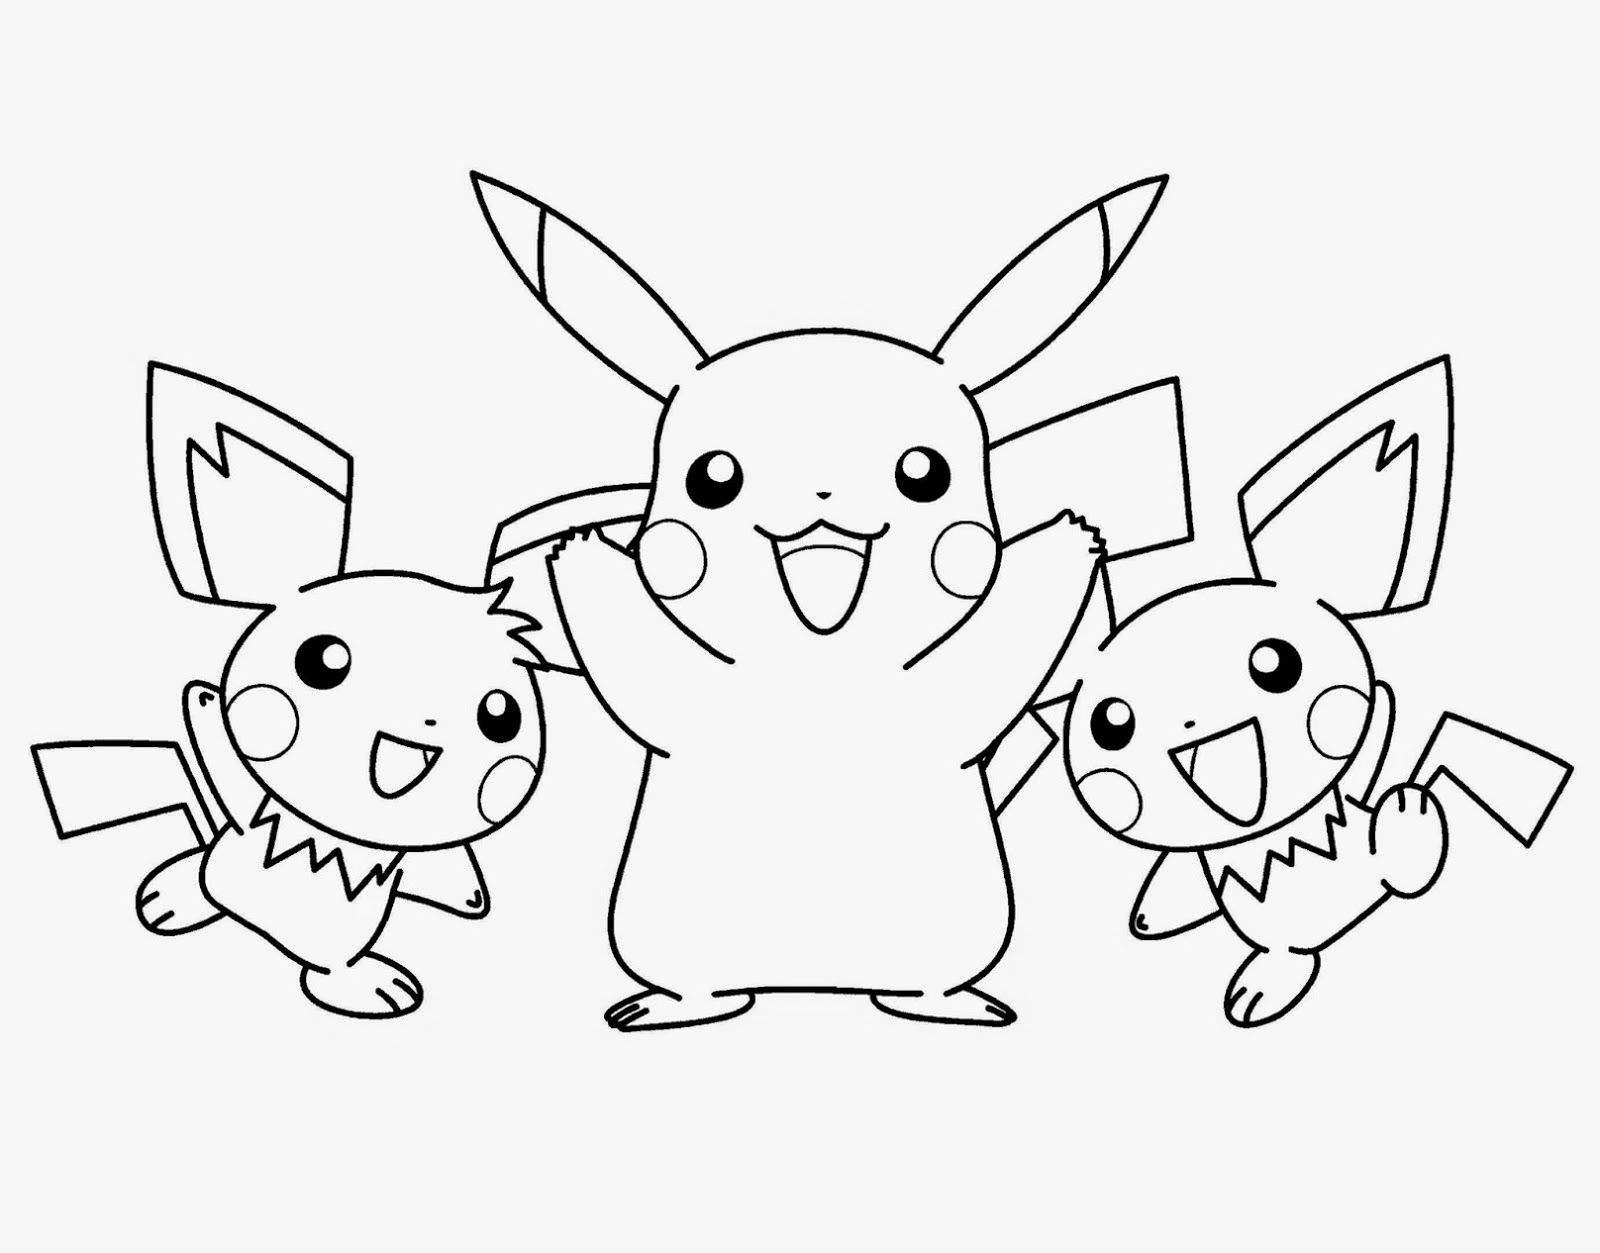 Pokemon Pichu Coloring Pages to Print Free Pokemon Coloring Pages